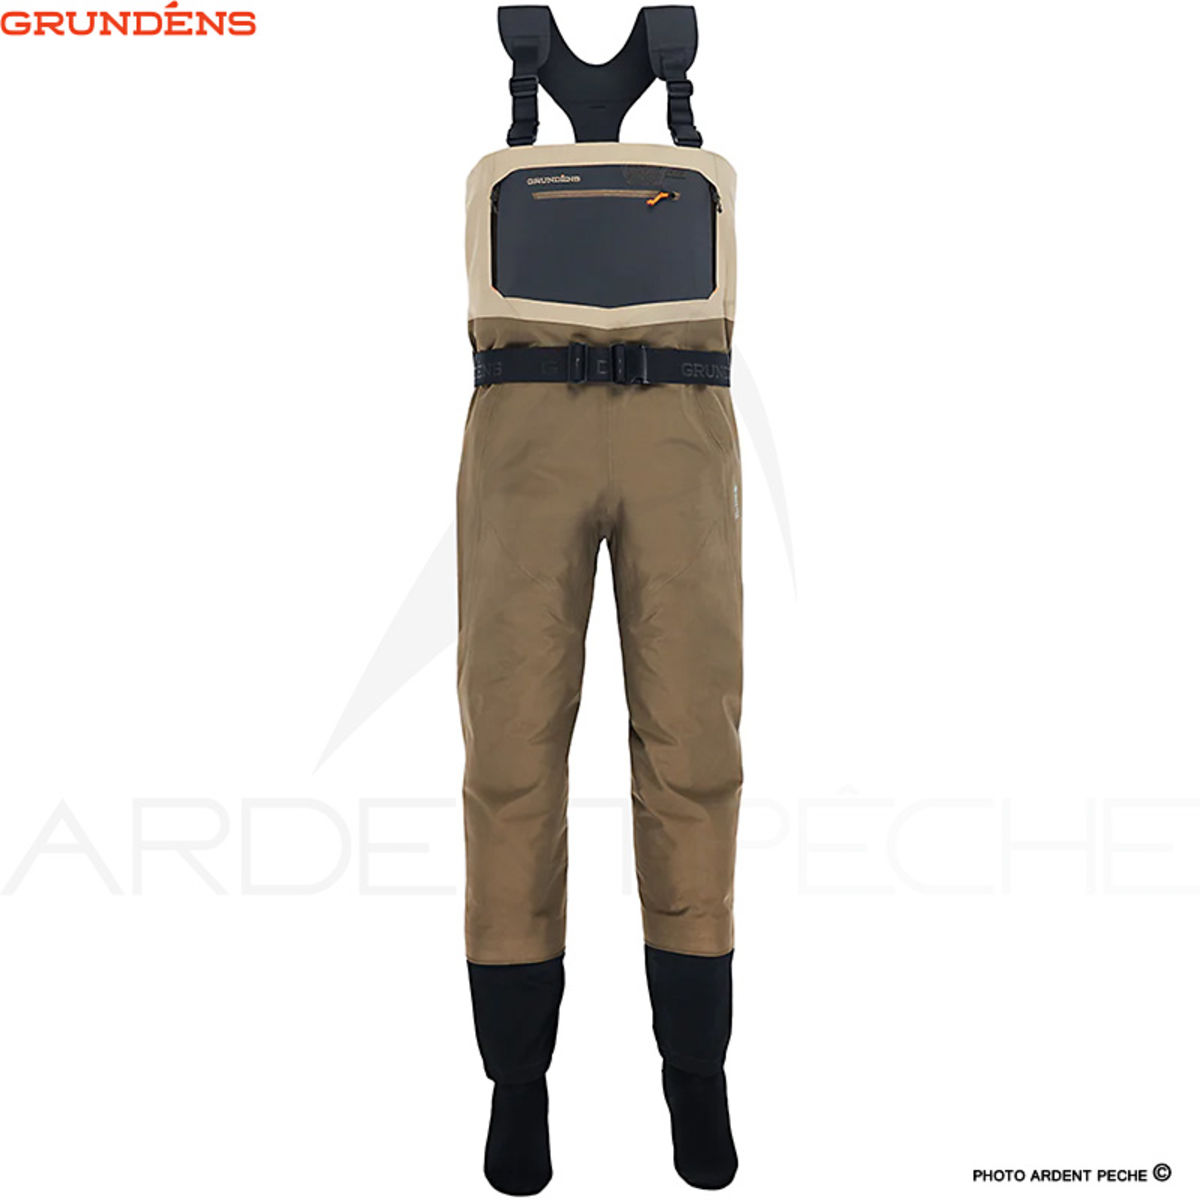 Chafik pêche - WADERS DE NEOPRENE STOCKING GRAUVELL Taille